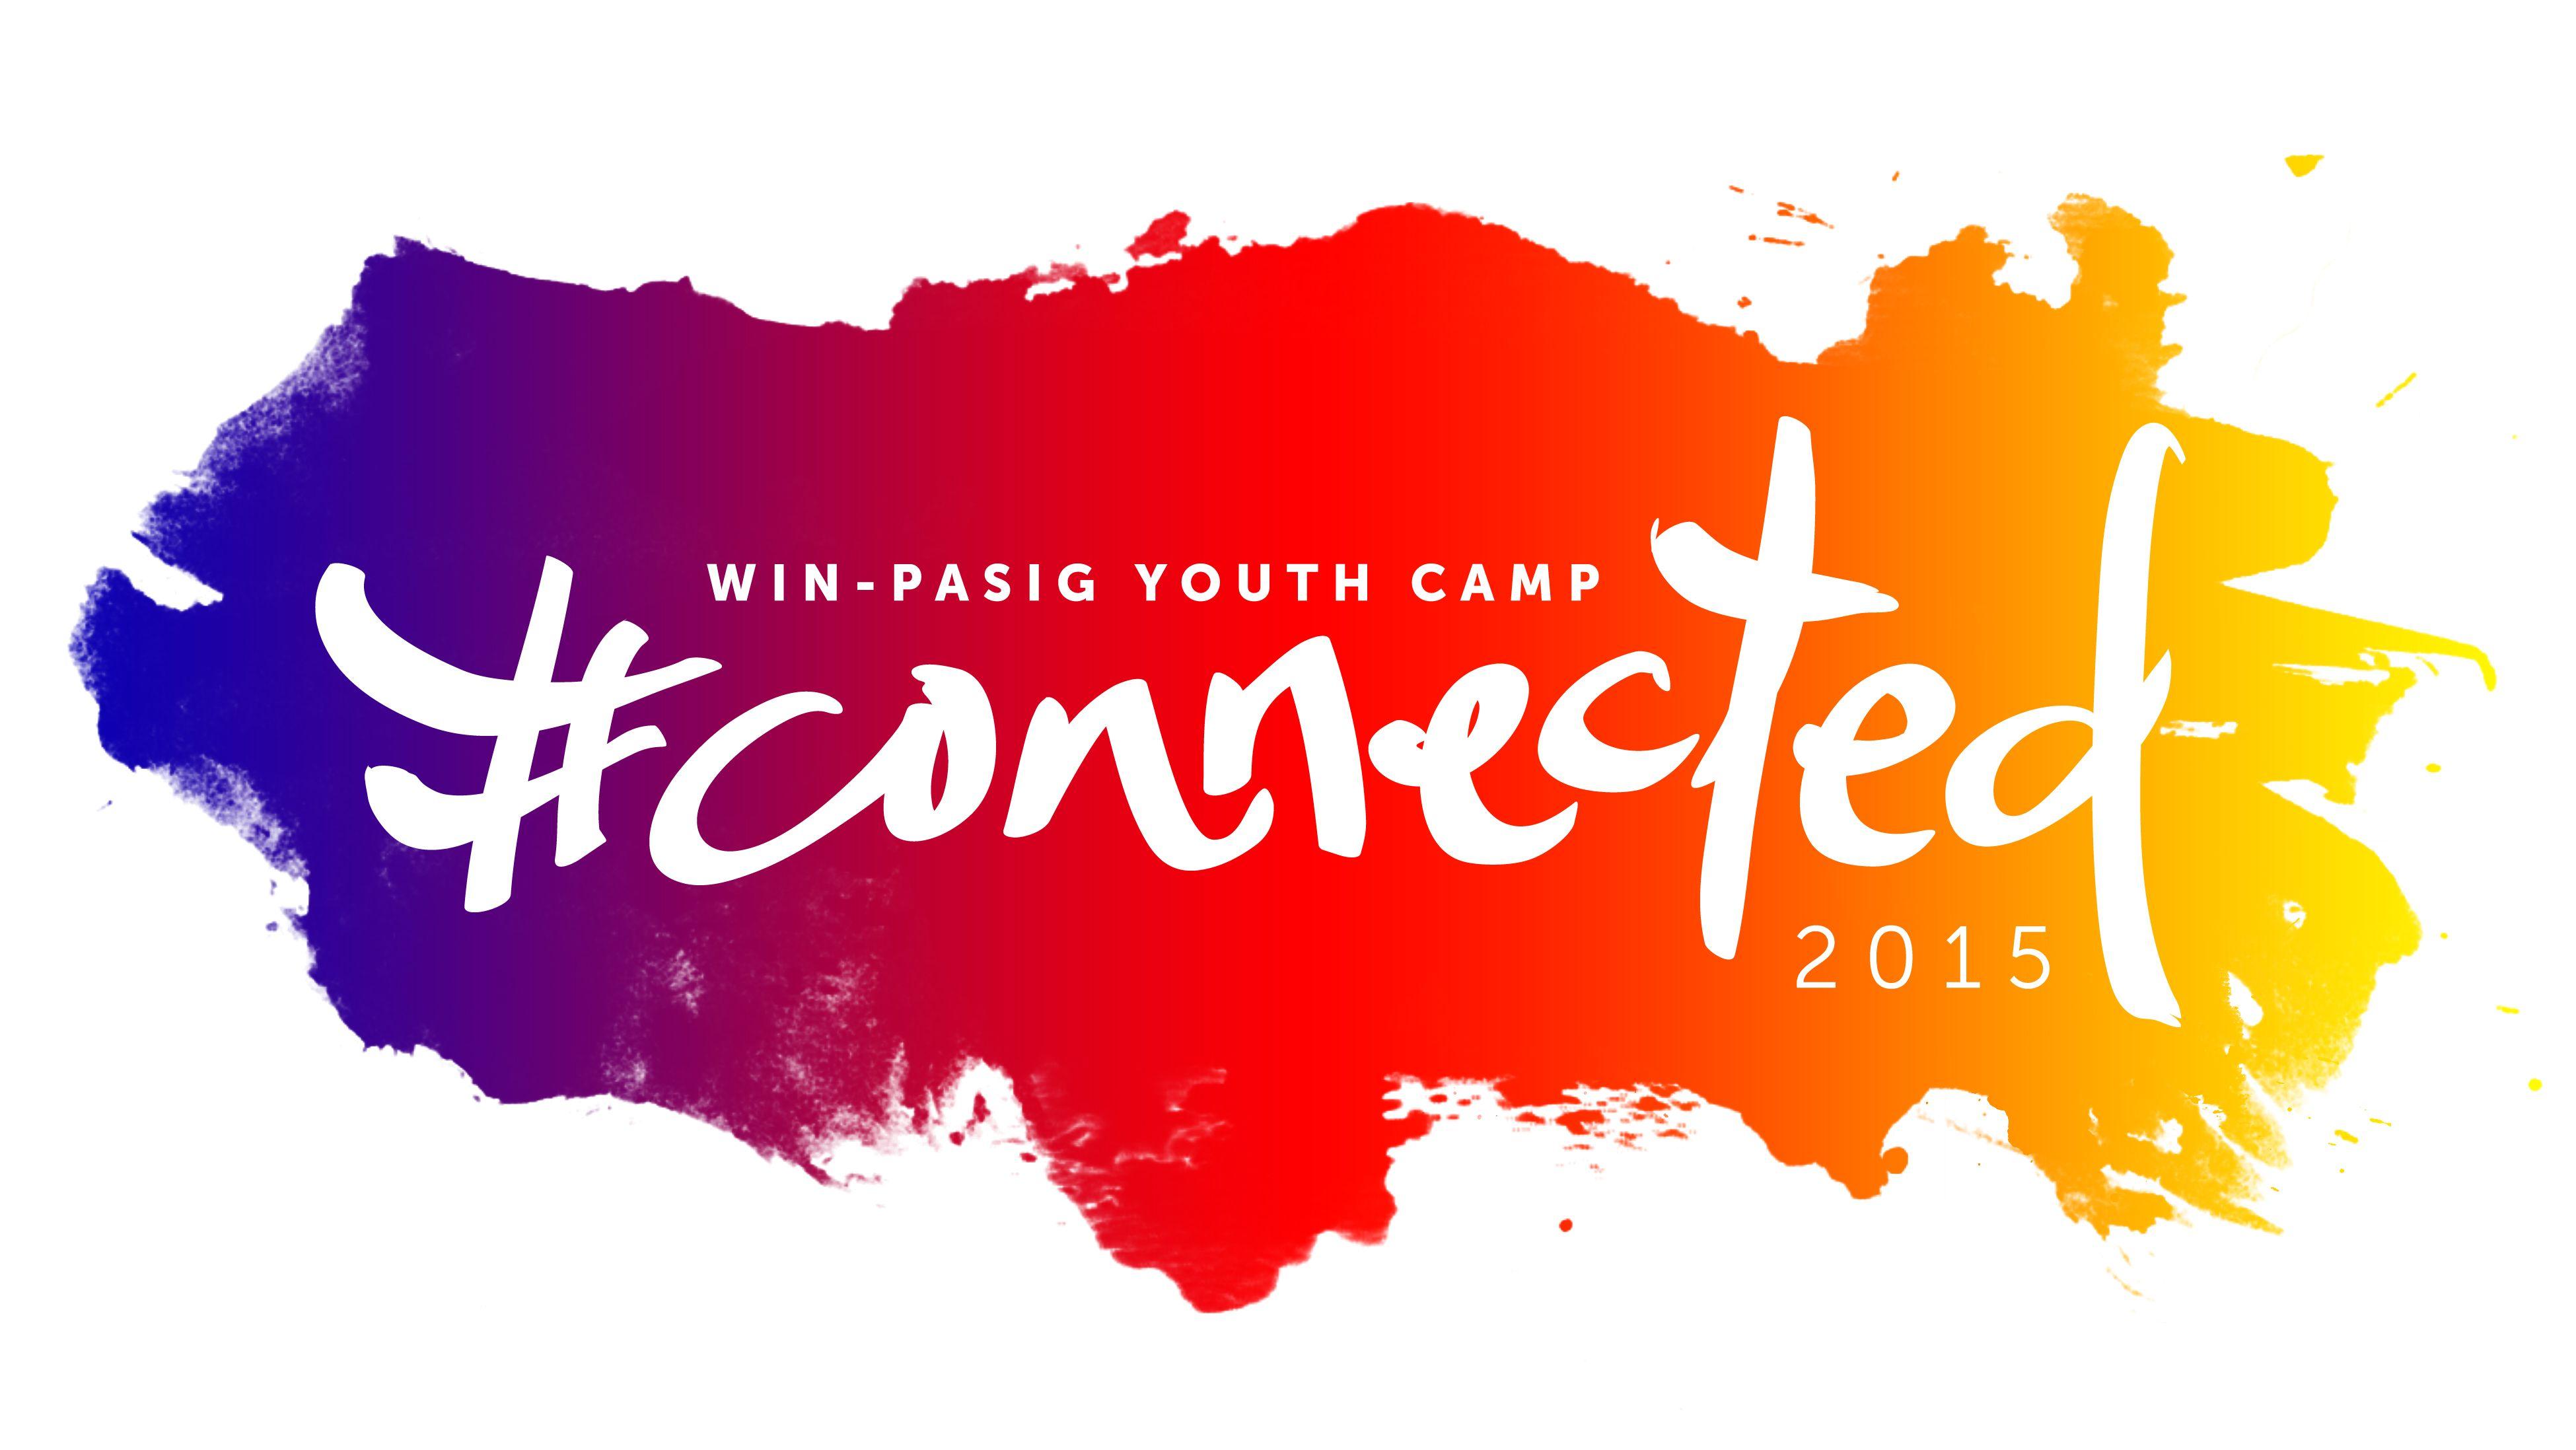 Youth Camp Logo - Connected Youth Camp – Theodore Llego